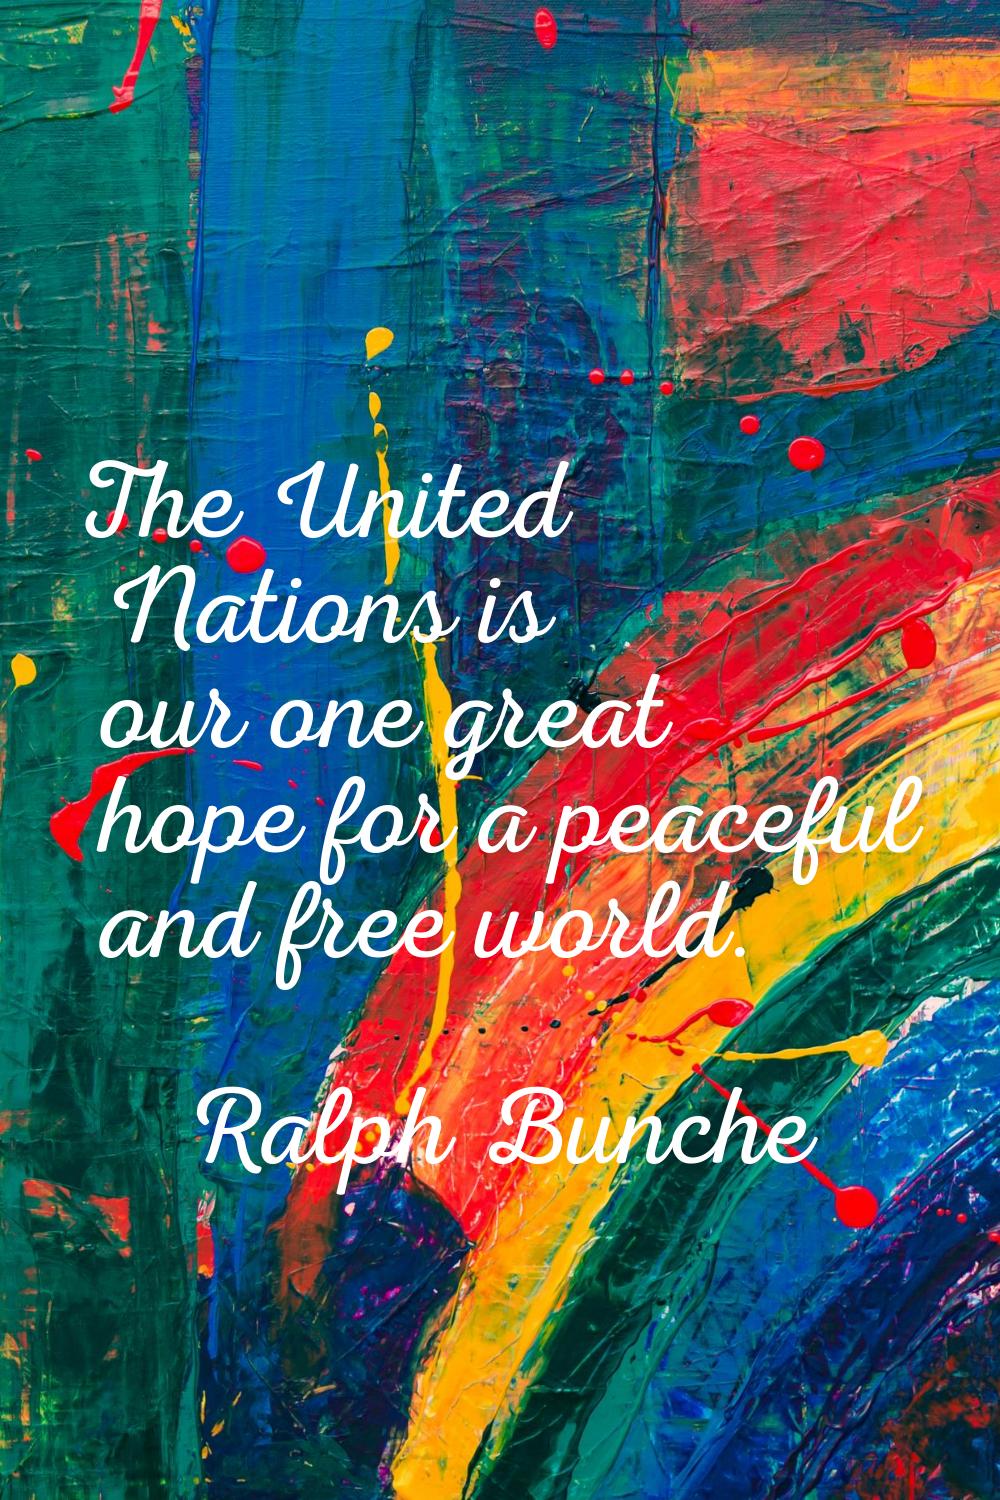 The United Nations is our one great hope for a peaceful and free world.